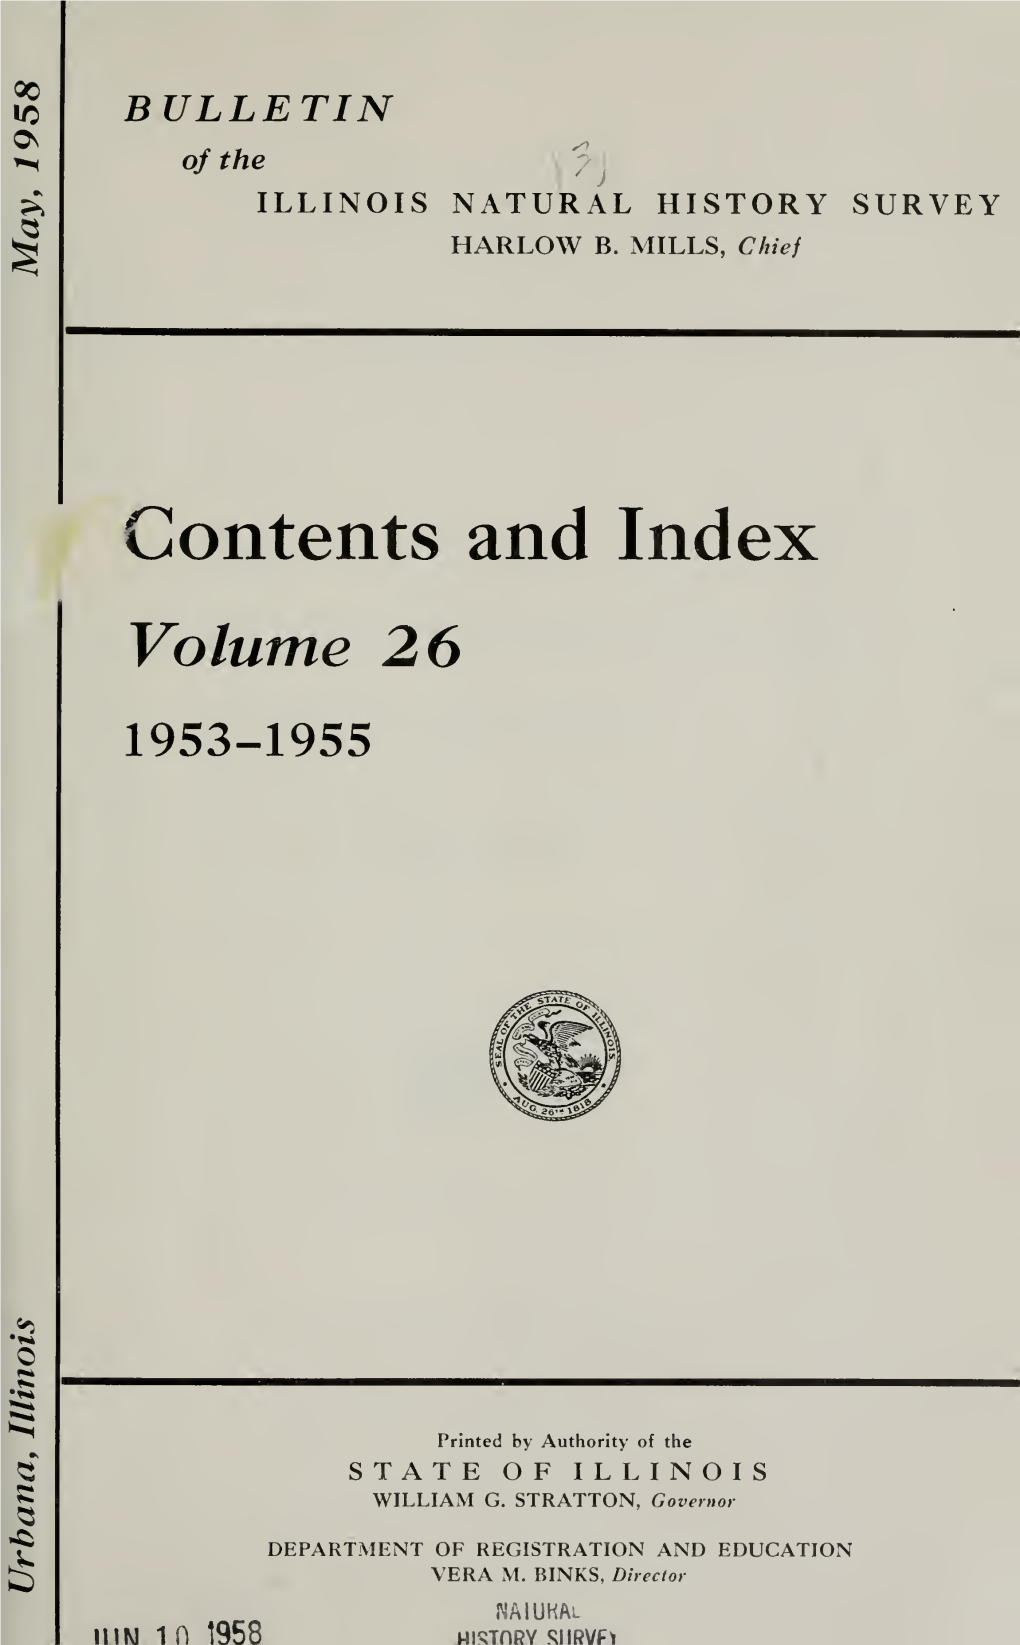 Contents and Index Volume 26 1953-1955